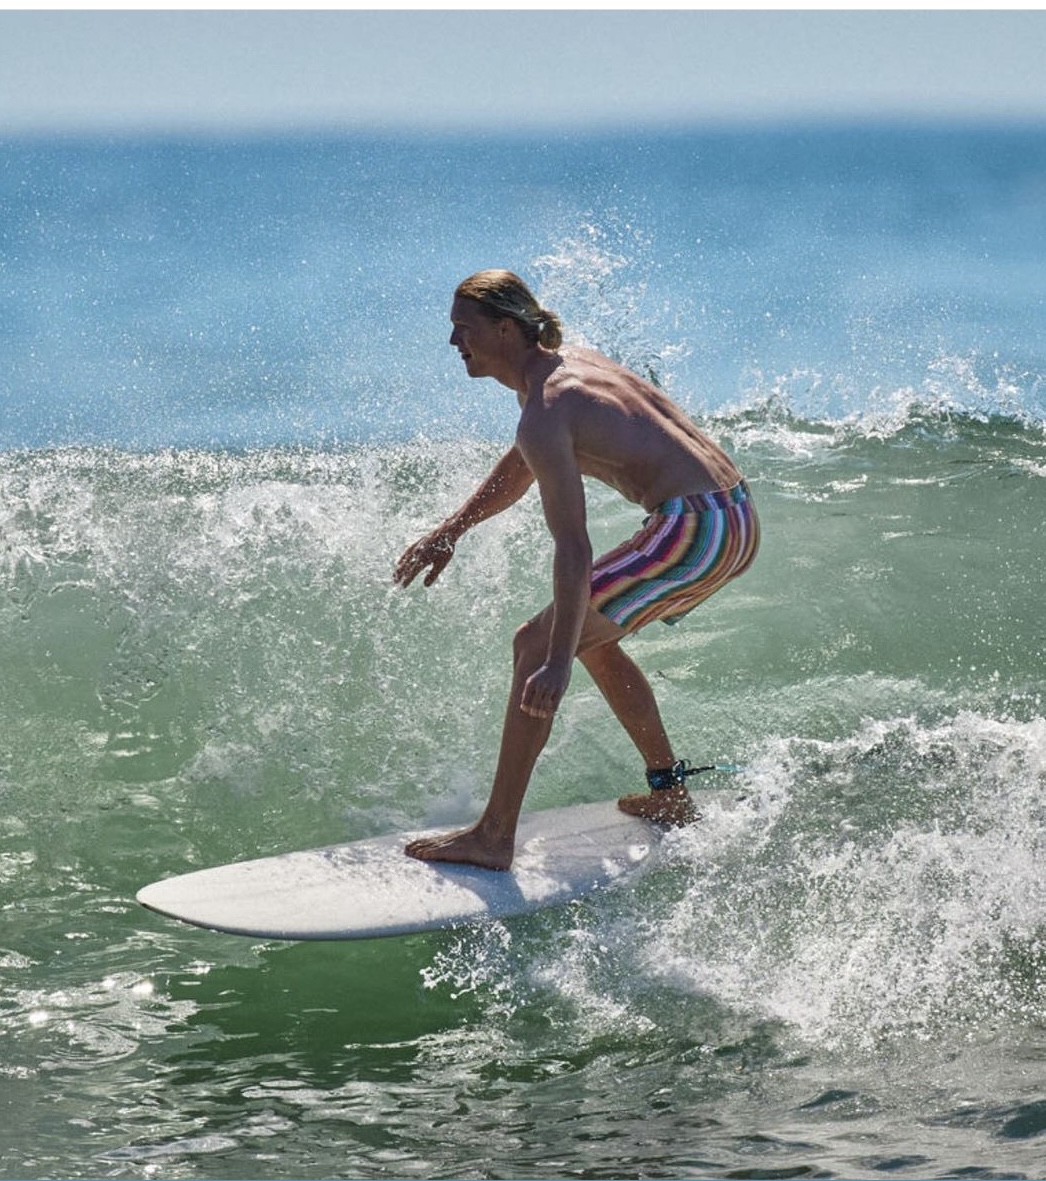 A lifestyle image from Prana showing a man surfing. 